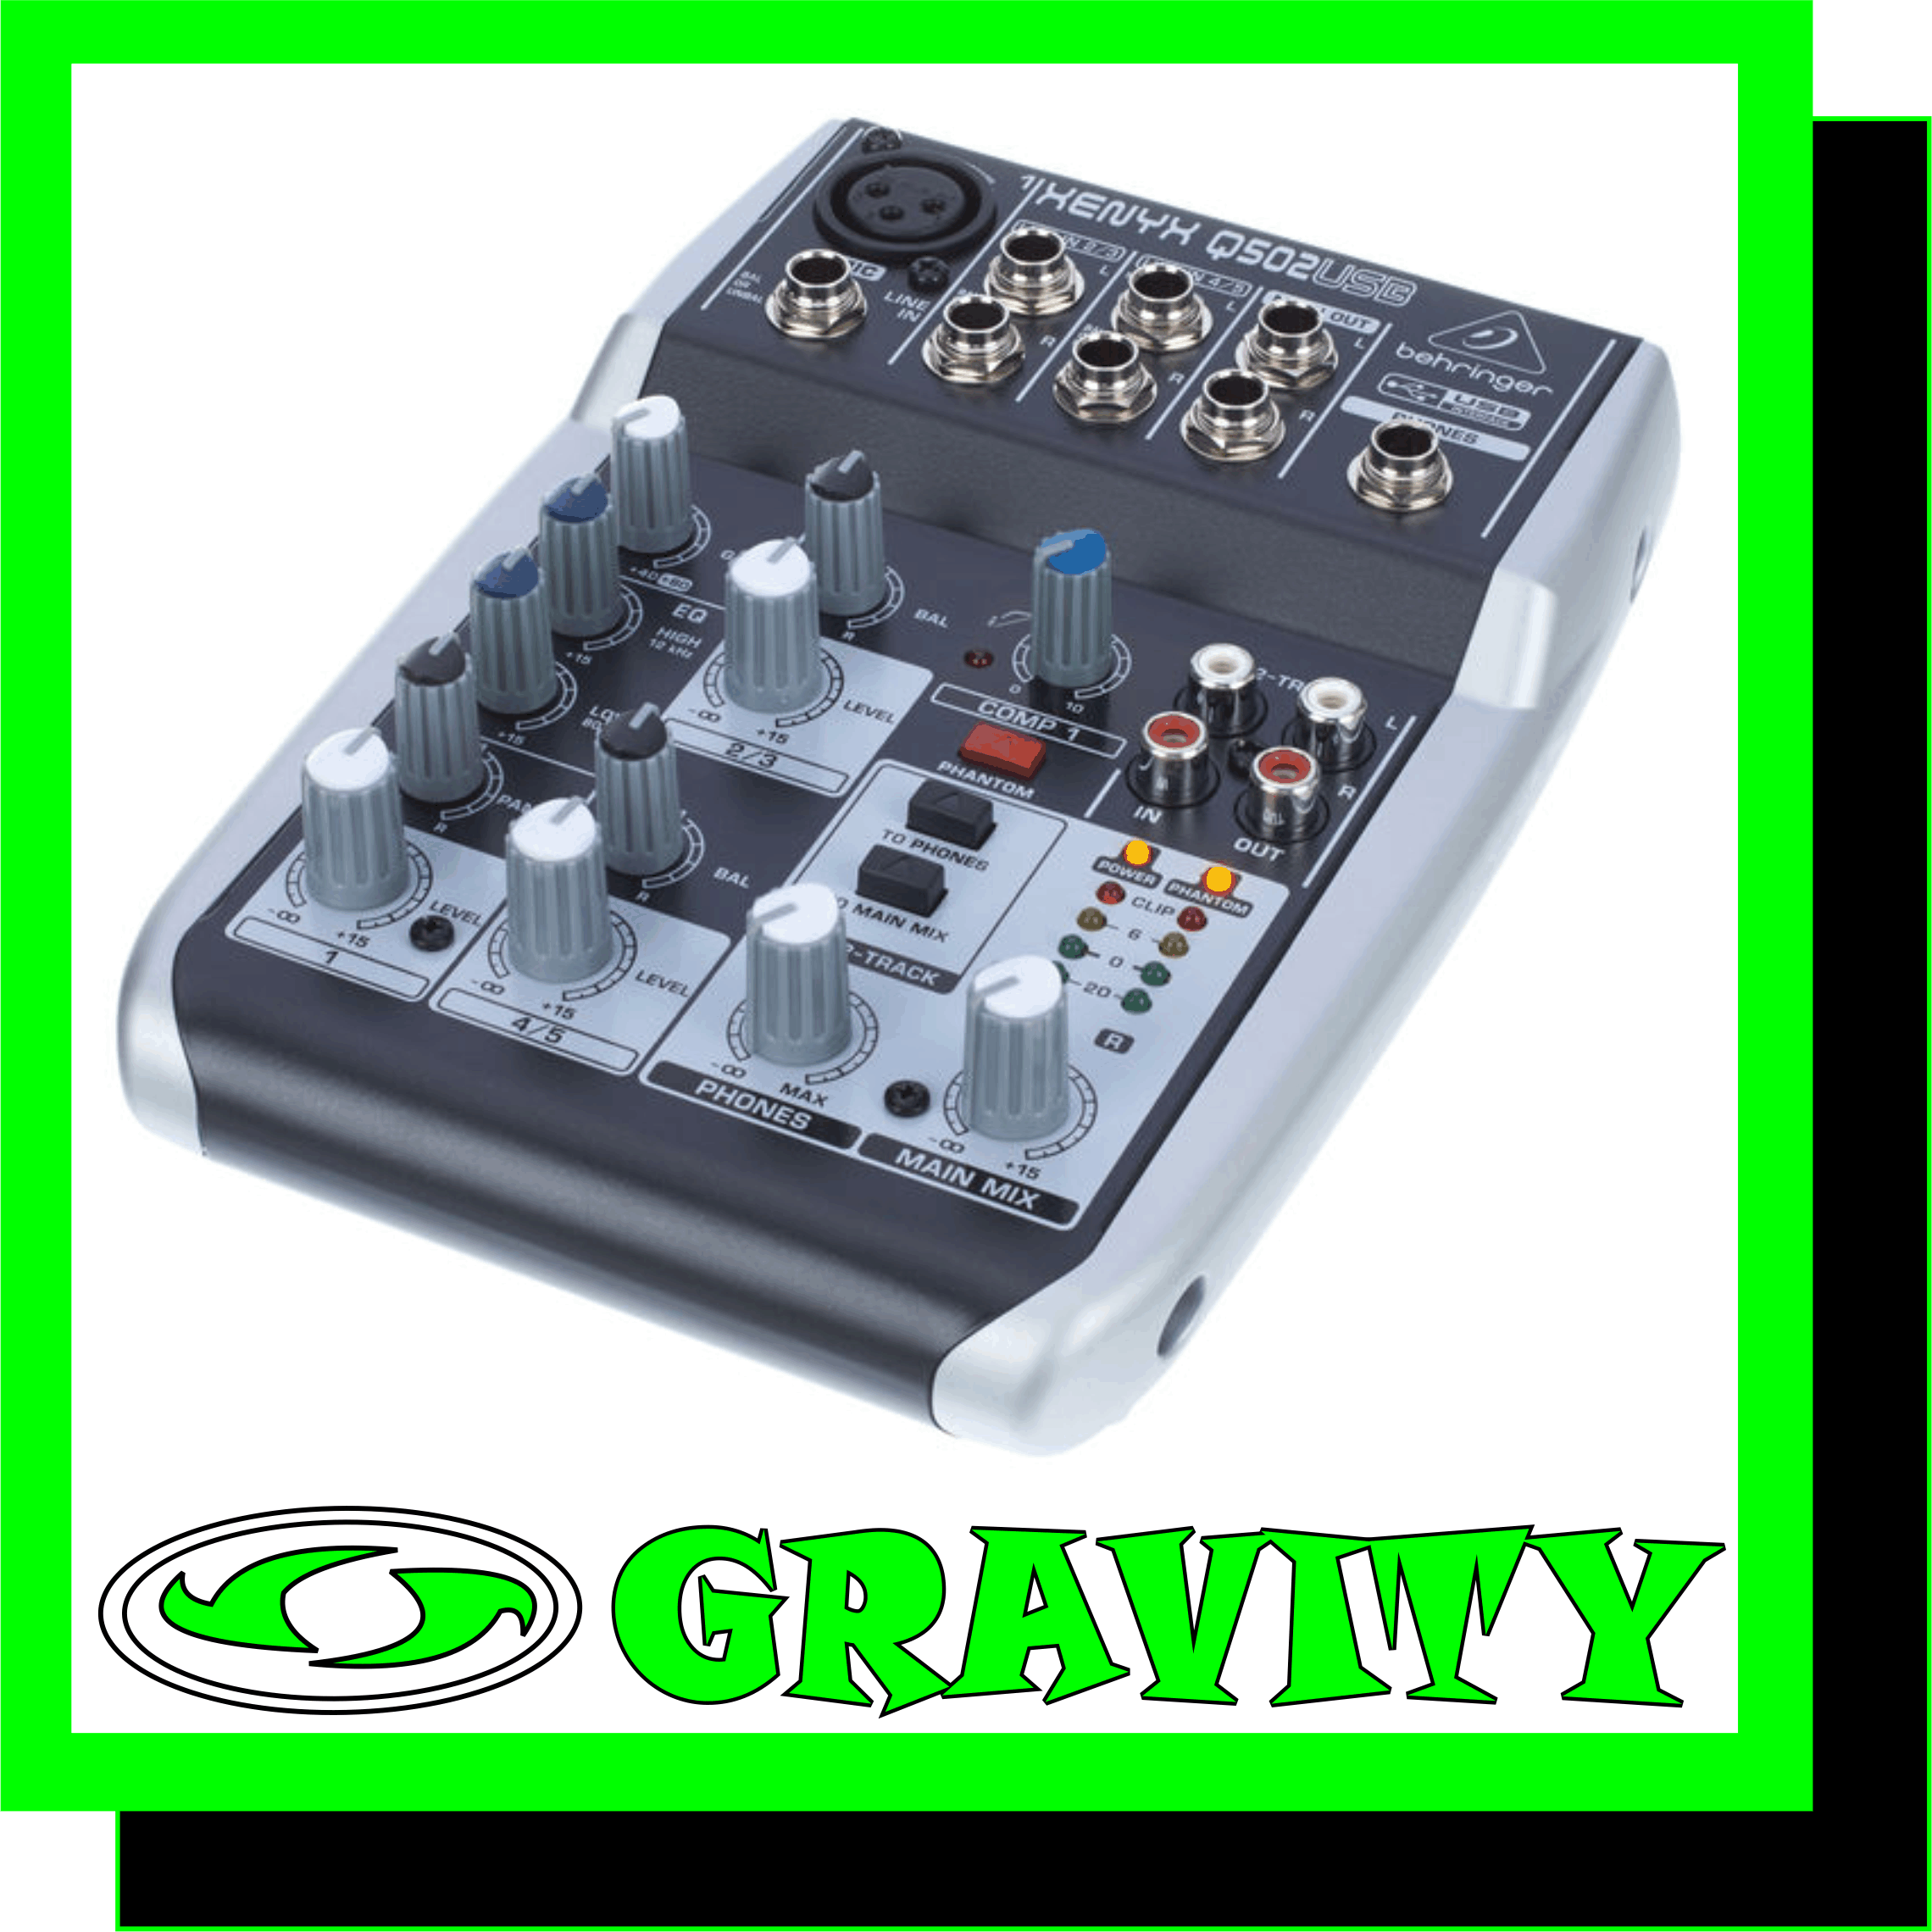 Behringer Xenyx Q502USB  -Premium ultra-low noise, high headroom analog mixer -State-of-the-art, phantom powered XENYX Mic Preamp comparable to stand-alone boutique preamps -Studio-grade compressor with super-easy “one-knob” functionality and control LED for professional vocal and instrumental sound -Built-in stereo USB/Audio Interface to connect directly to your computer. Free audio recording, editing and podcasting software plus 150 instrument/effect plug-ins  downloadable at behringer.com -Neo-classic "British" 2-band EQ for warm and musical sound